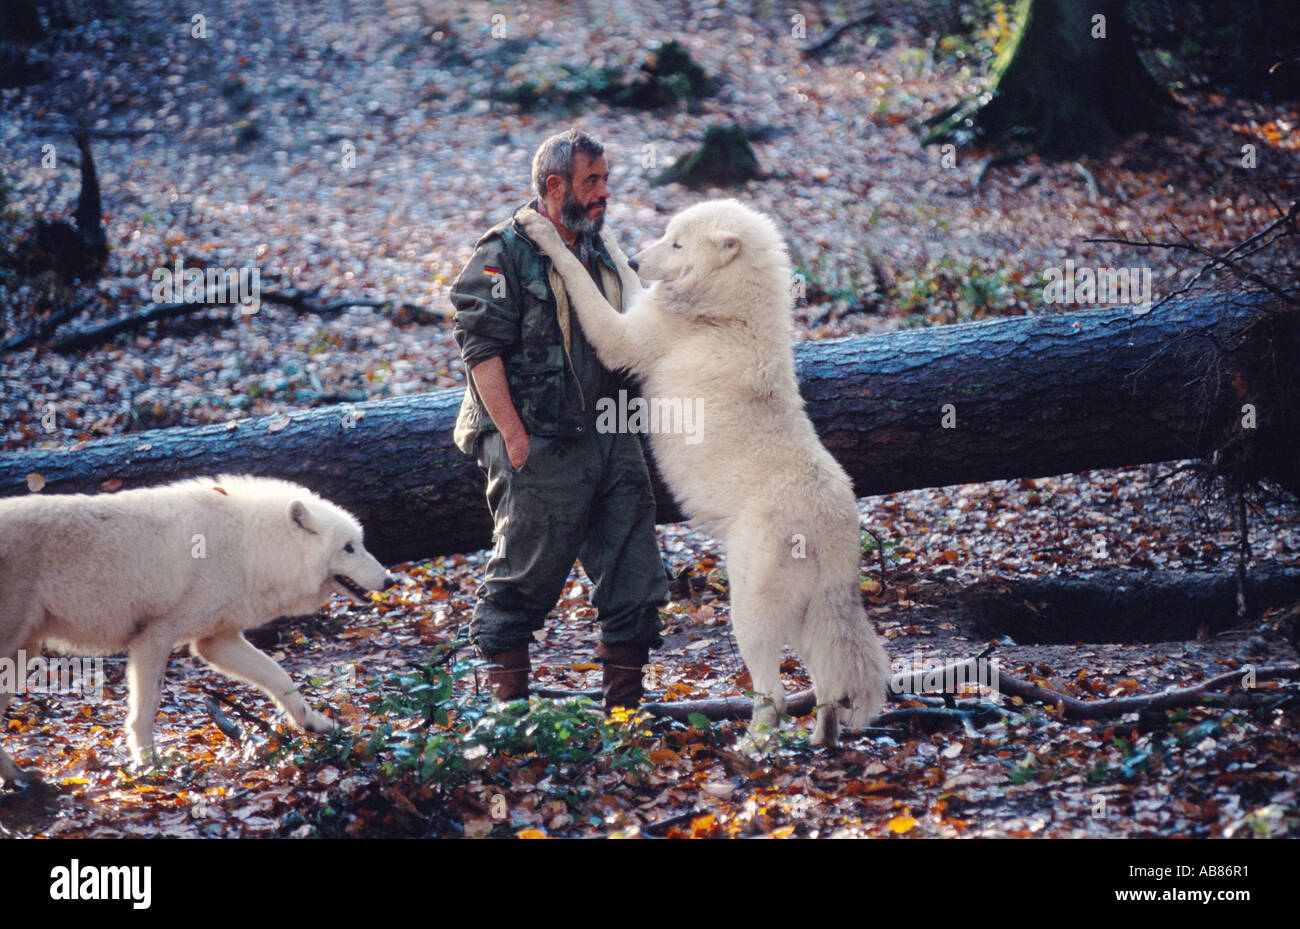 arctic wolf, tundra wolf (Canis lupus albus), Werner Freund with wolf standing upright, Germany, Saarland, Merzig Stock Photo